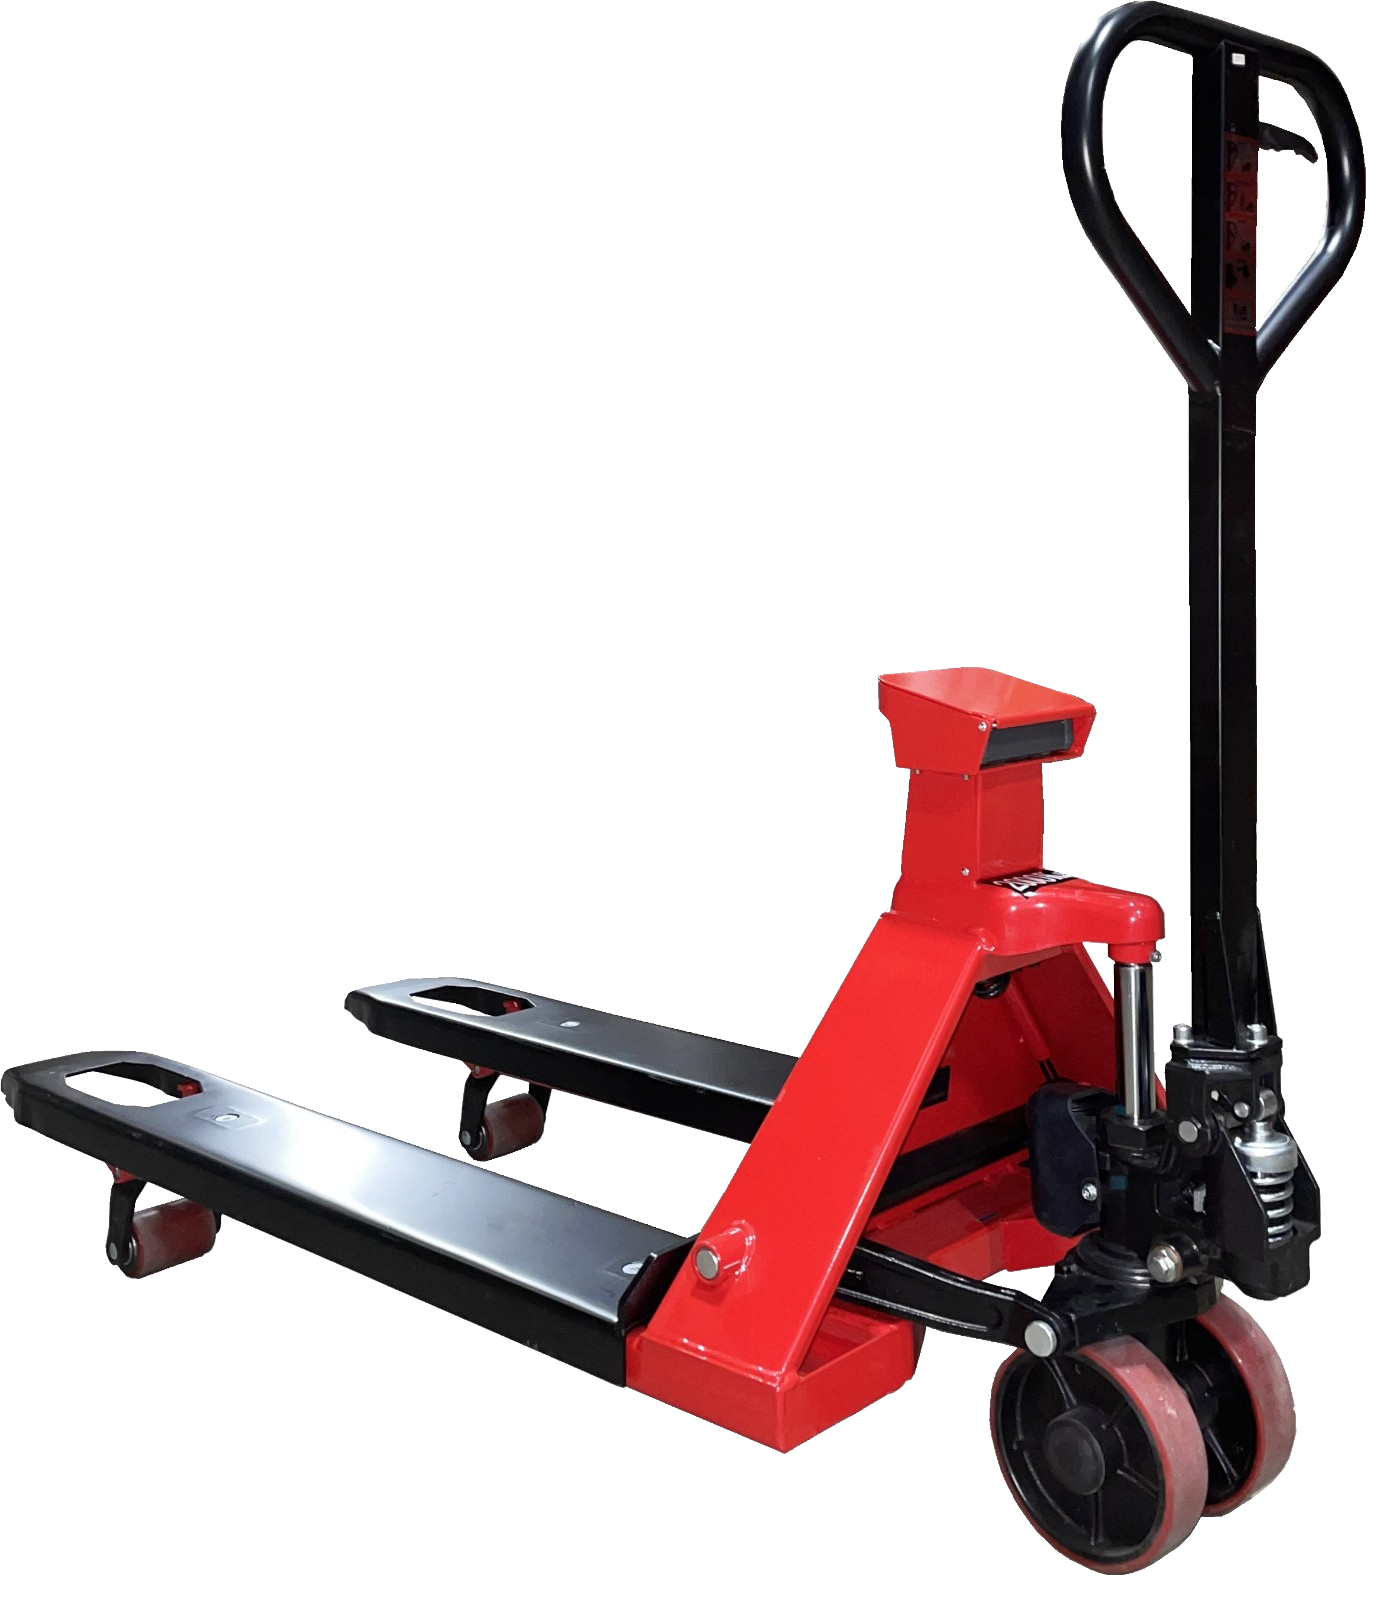 Pake Handling Tools, Pake Handling Tools PAKPT03 Scale Pallet Truck 45" x 27" Fork 4400 lbs Capacity New